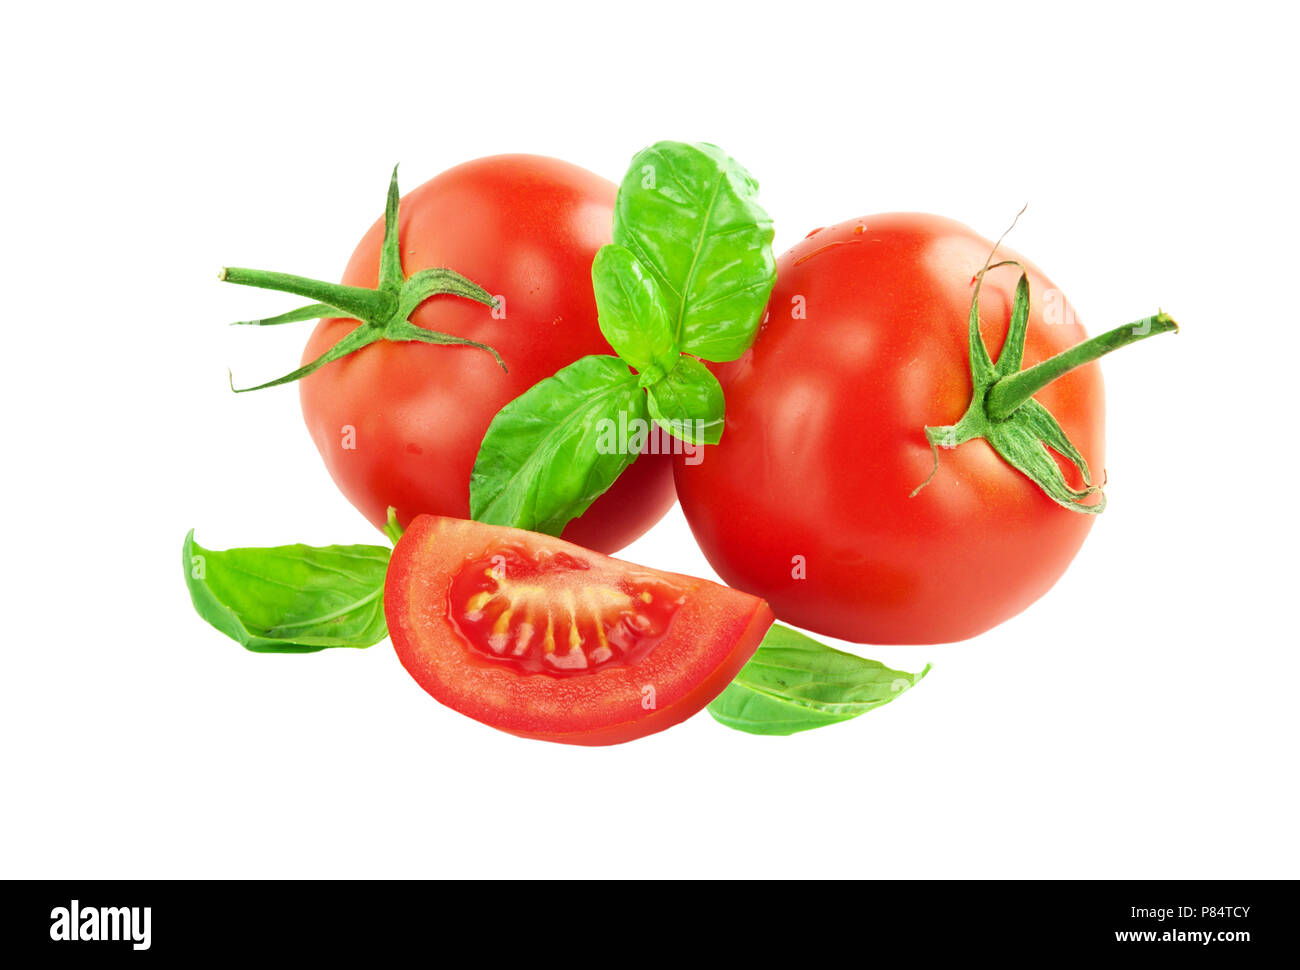 Whole tomato with a slice of tomato and basil leaves on a white background closeup Stock Photo